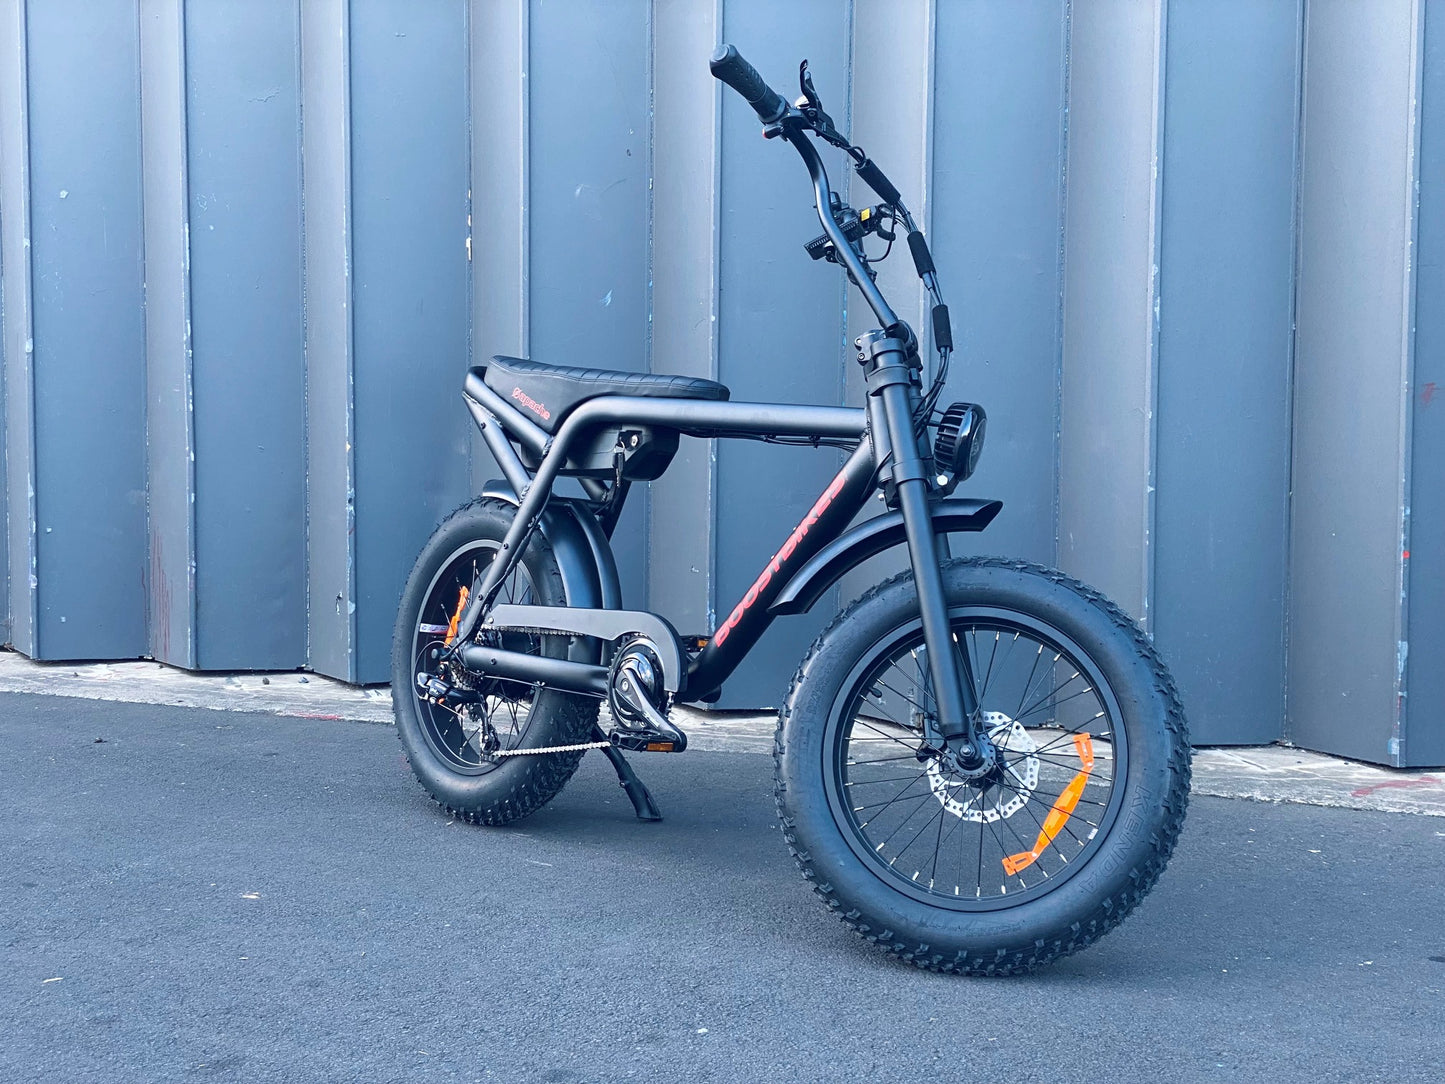 The Apache Electric Bike combines a great look, a comfortable riding position with quality components and manufacturing. From Boostbikes 